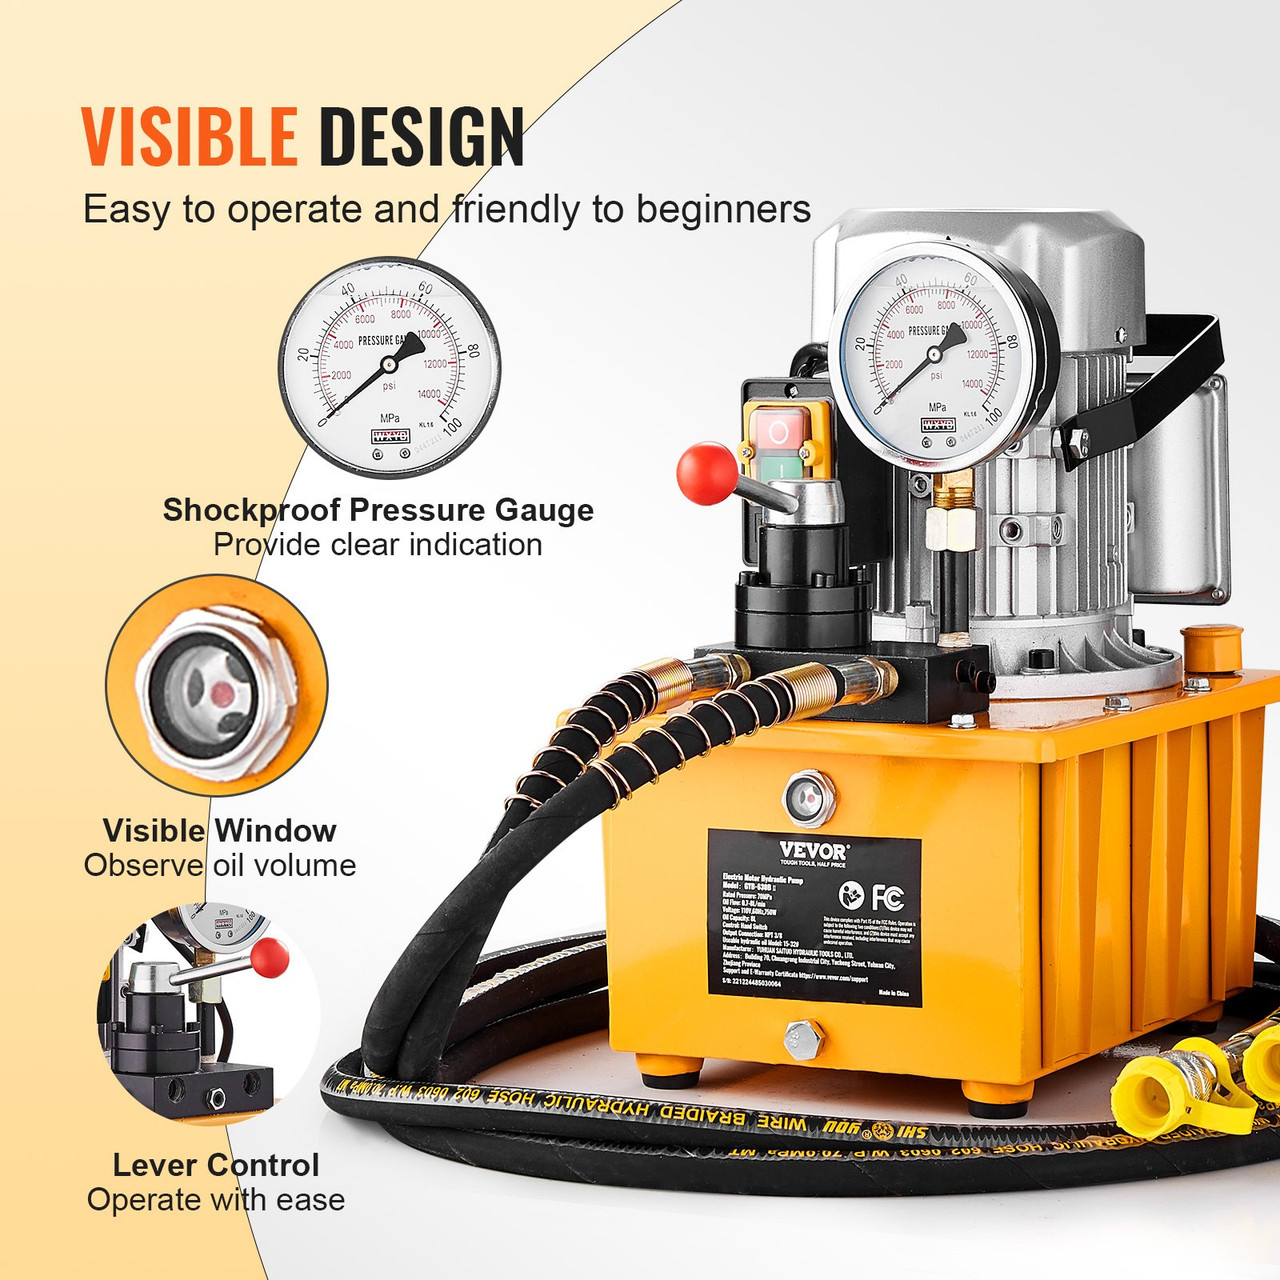 Electric Hydraulic Pump, 10000 PSI 750W 110V, 488 in³/8L Capacity, Double Acting Manual Valve, Electric Driven Hydraulic Pump Power Pack Unit with Lever Switch for Punching/Bending/Jack Machines